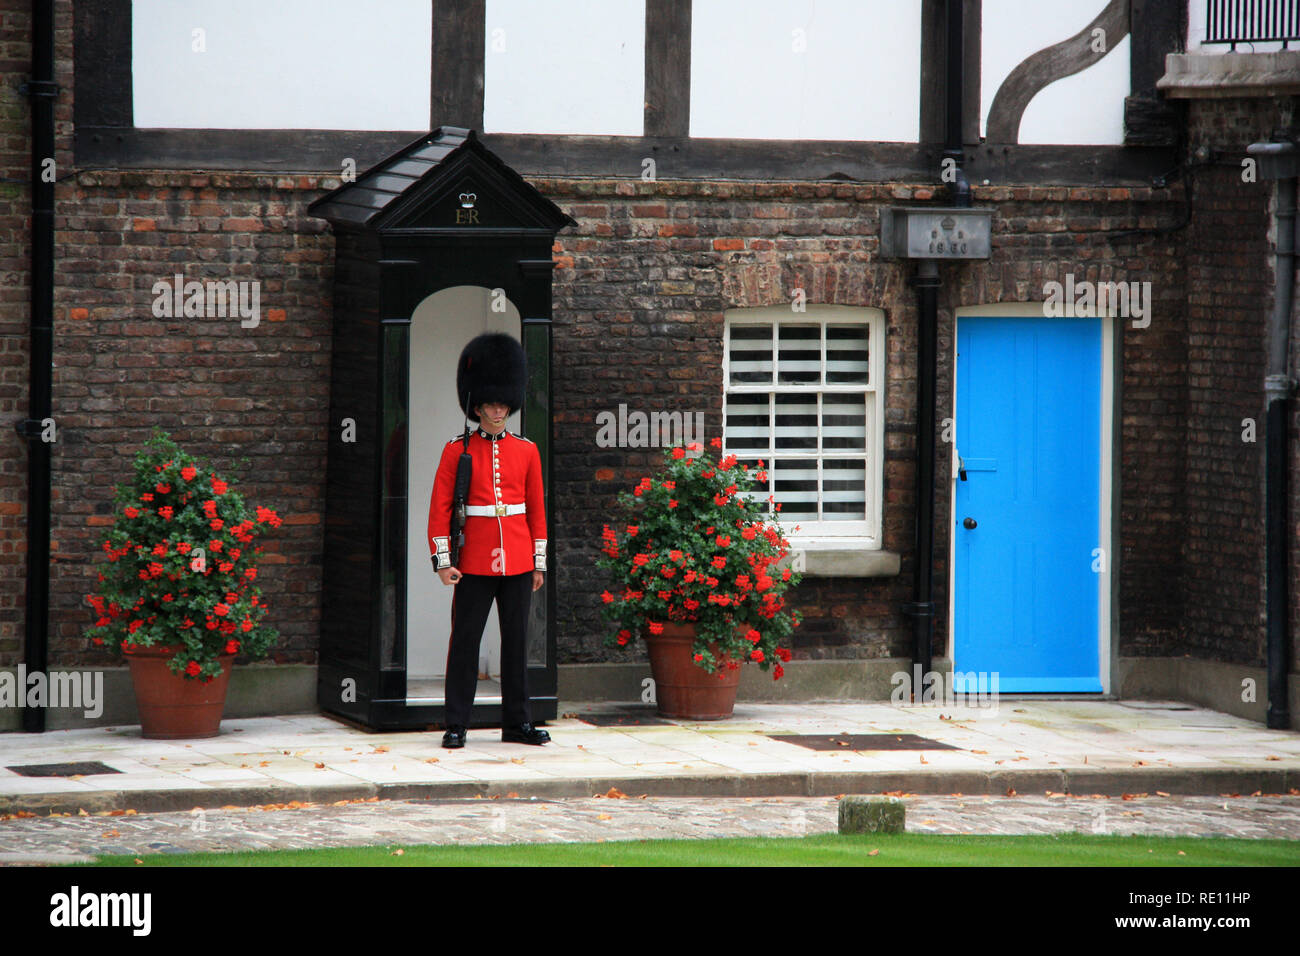 Grenadier Guard and sentry box in front of the Queen's House at Her Majesty's Royal Palace and Fortress of the Tower of London - London, UK Stock Photo